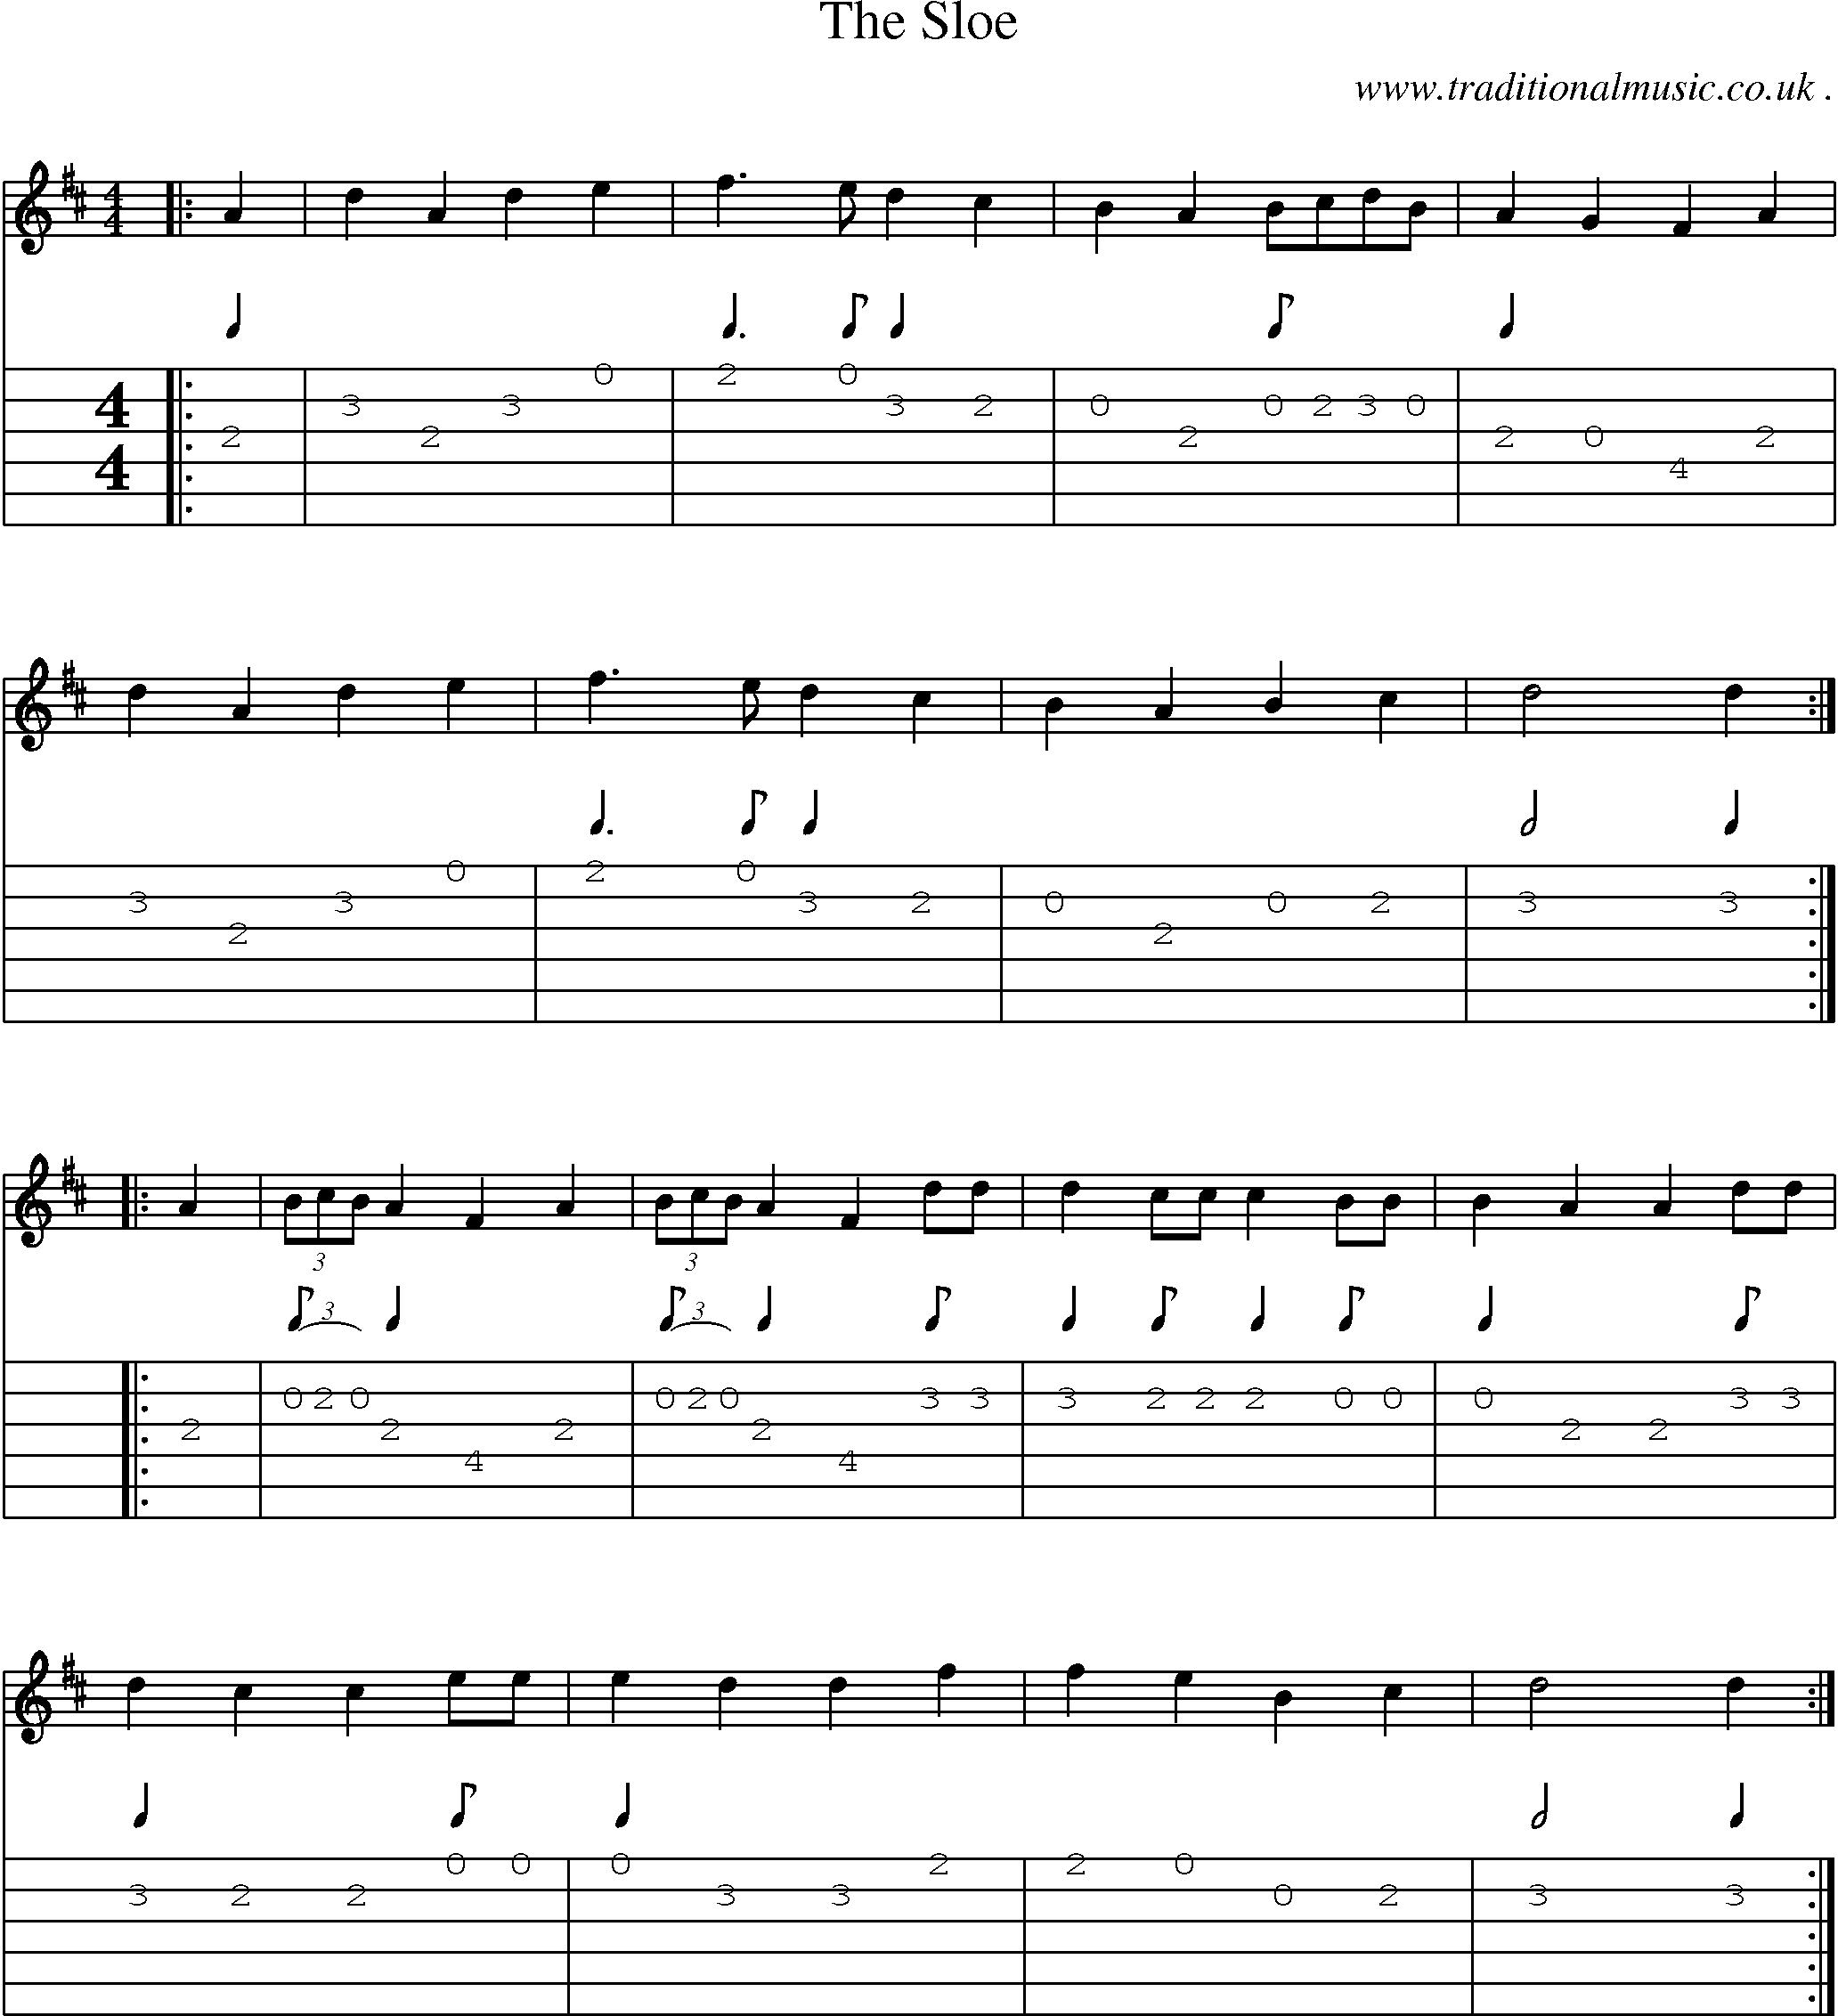 Sheet-Music and Guitar Tabs for The Sloe